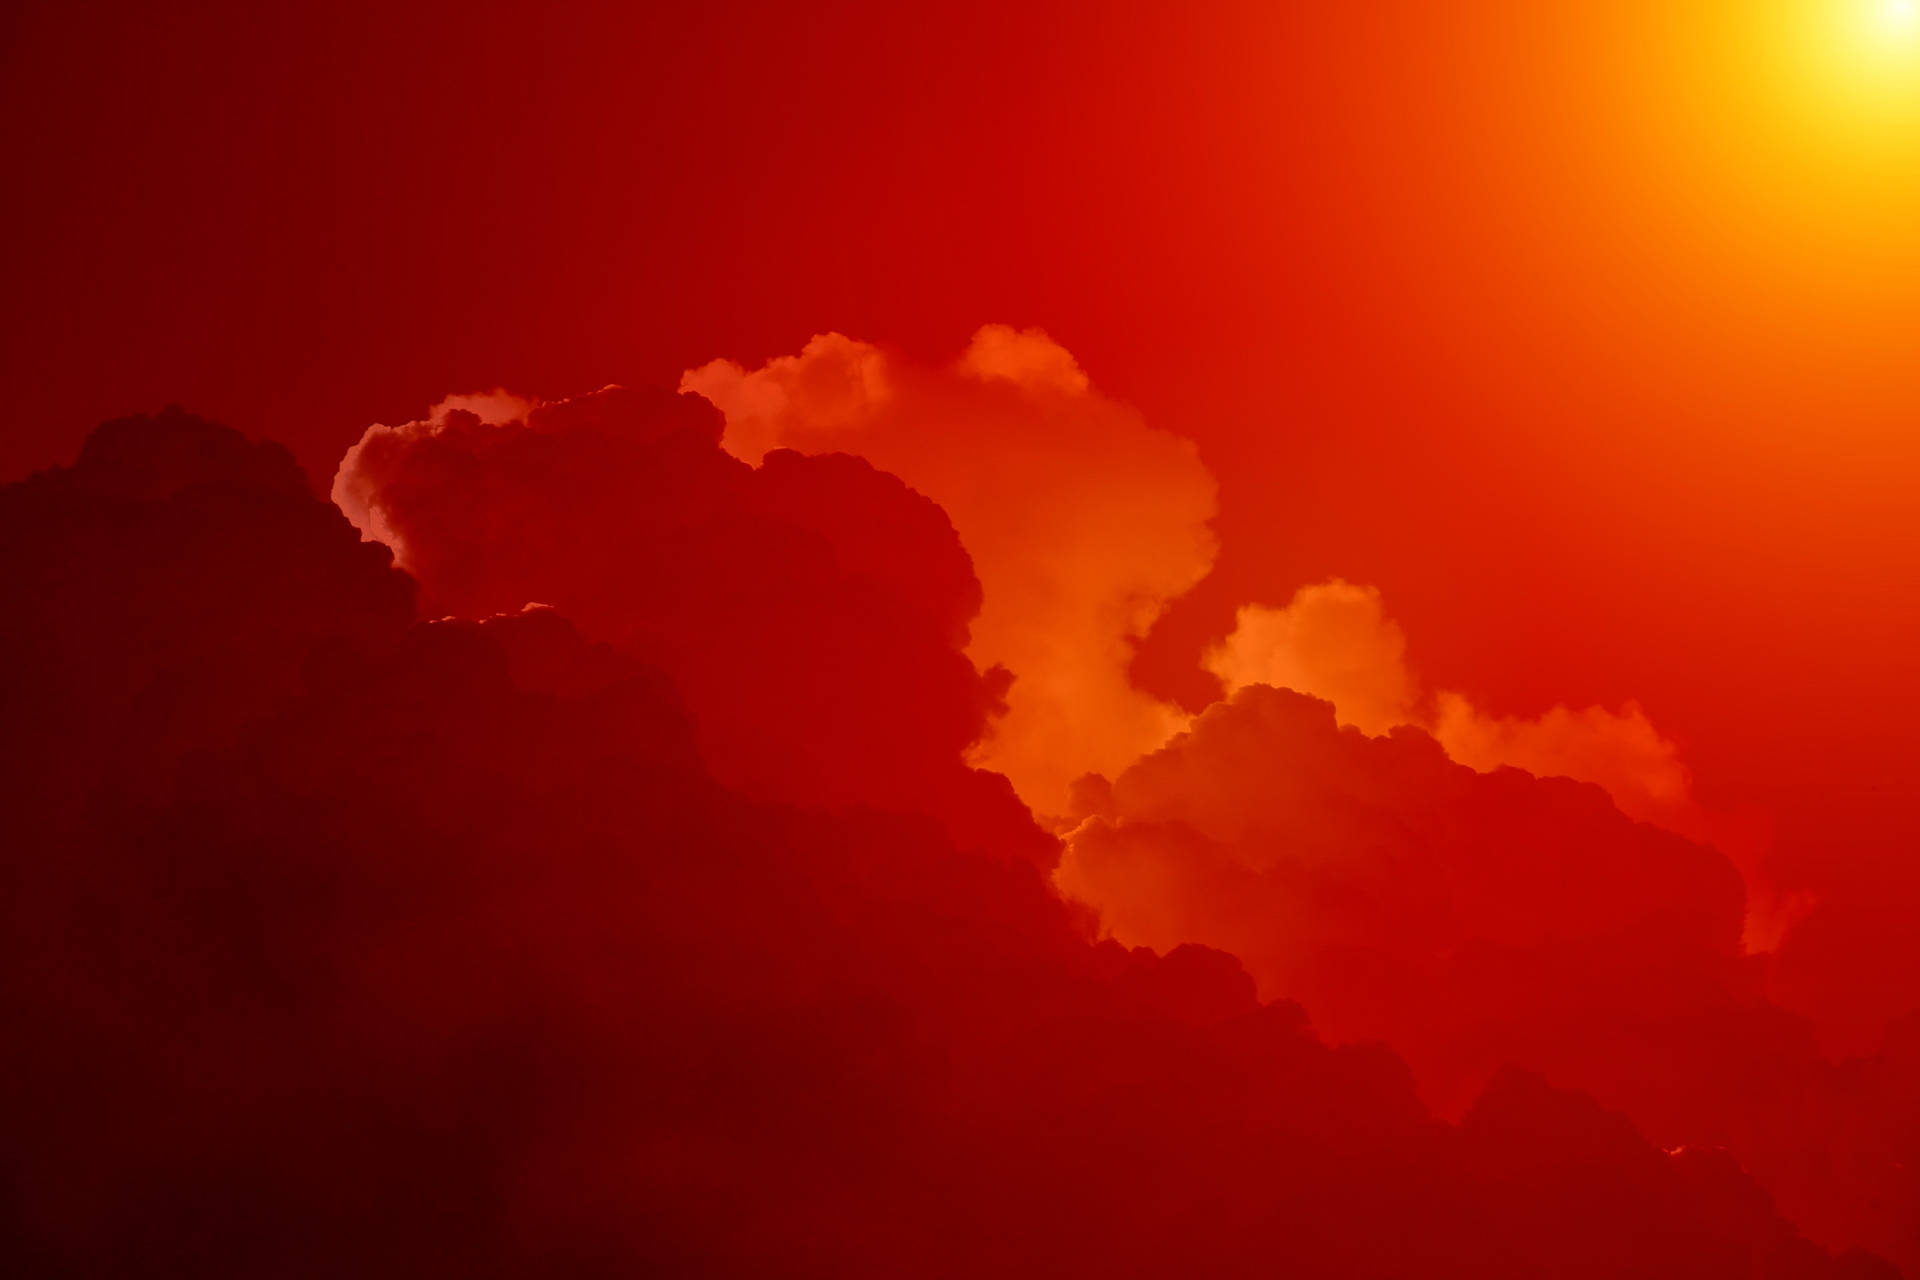 Aesthetic Sky Of Red With Clouds Wallpaper